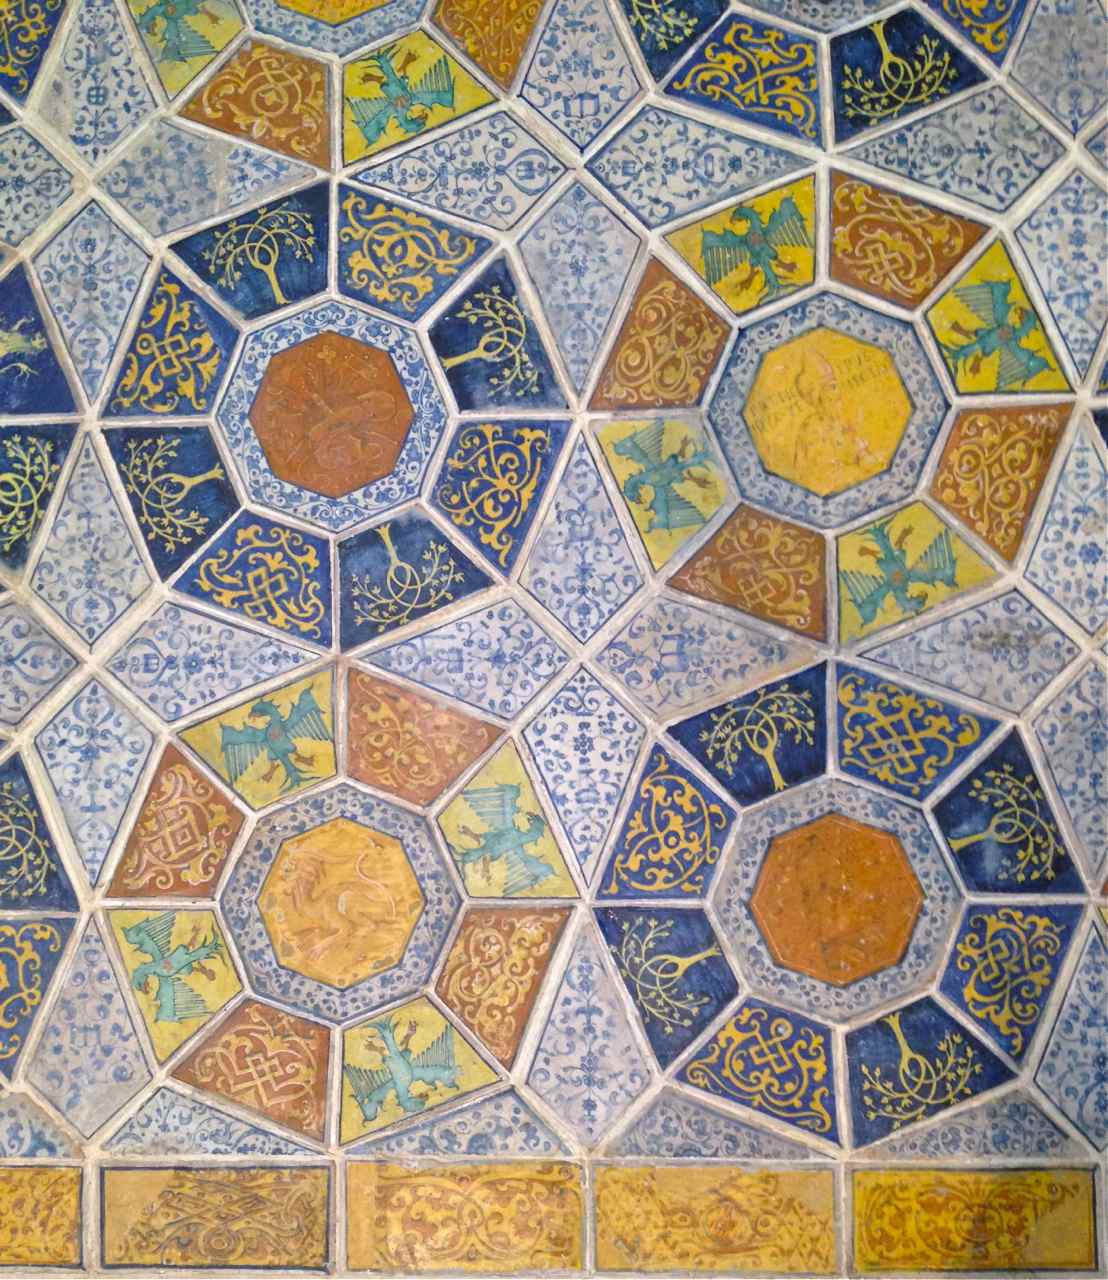 Octagonal Italian Tile, 1513, at the V&A Museum, London